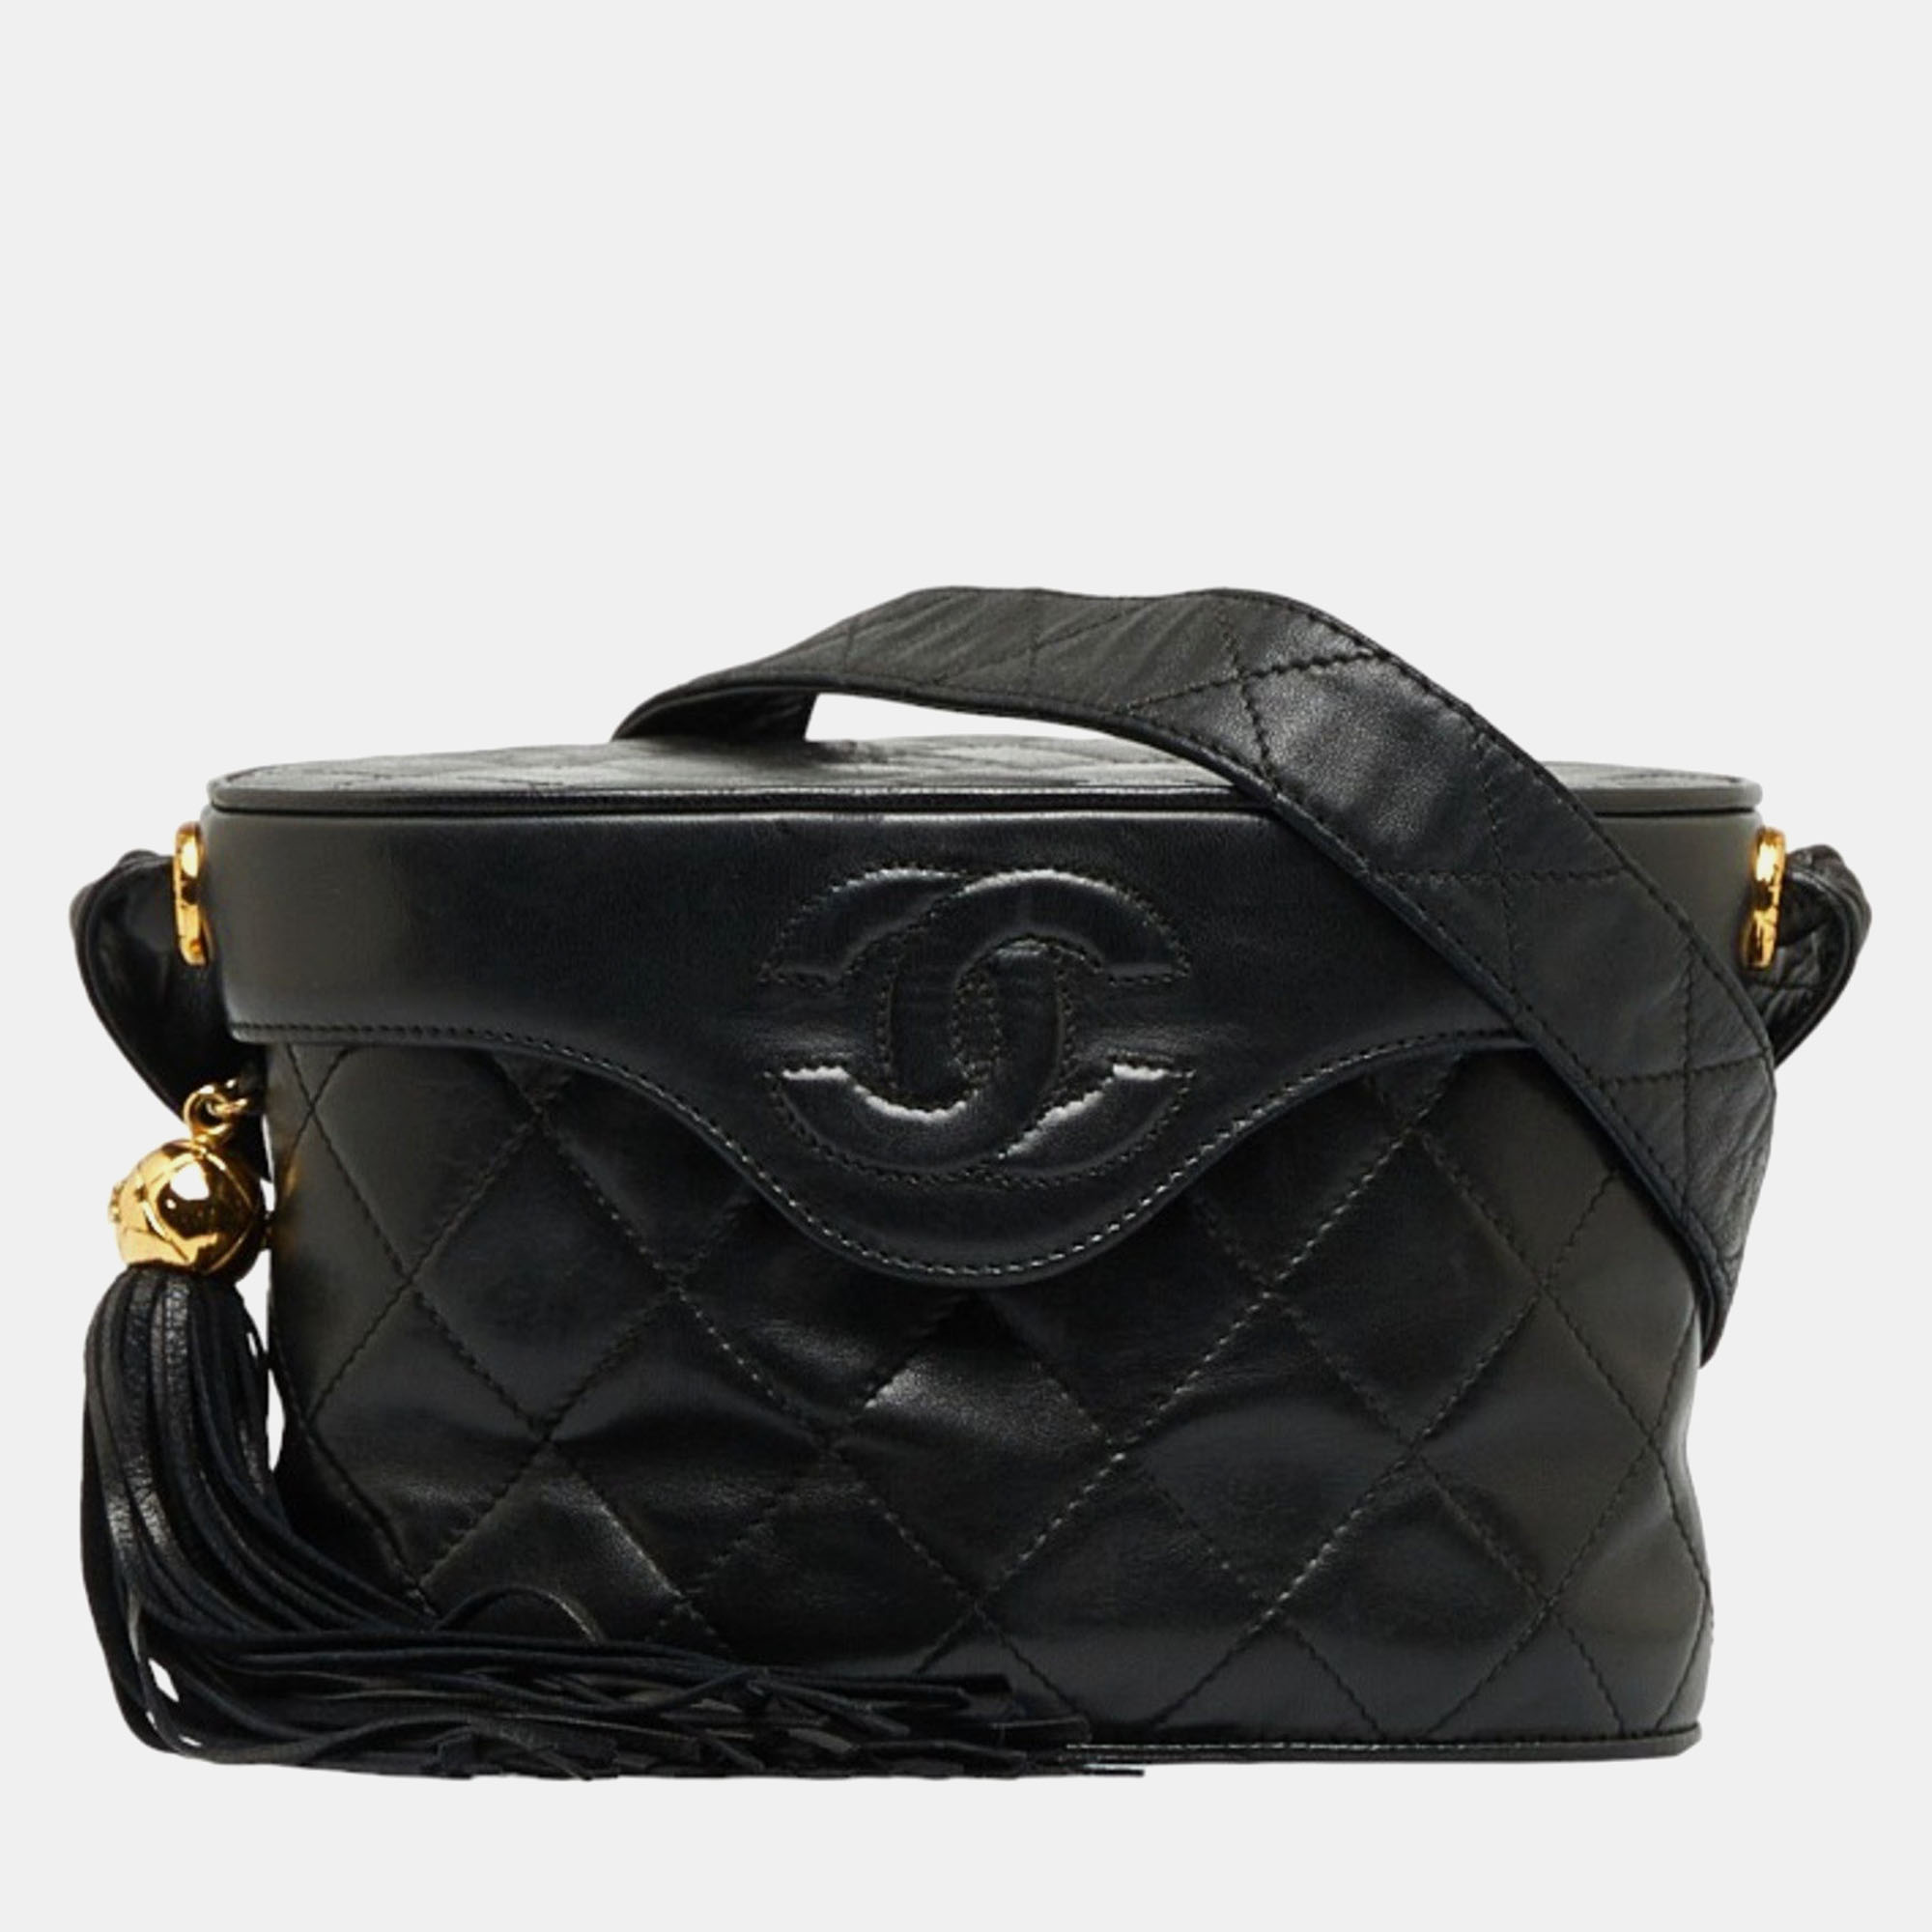 

Chanel Black Quilted Leather Small Vintage Tassel Box Bag